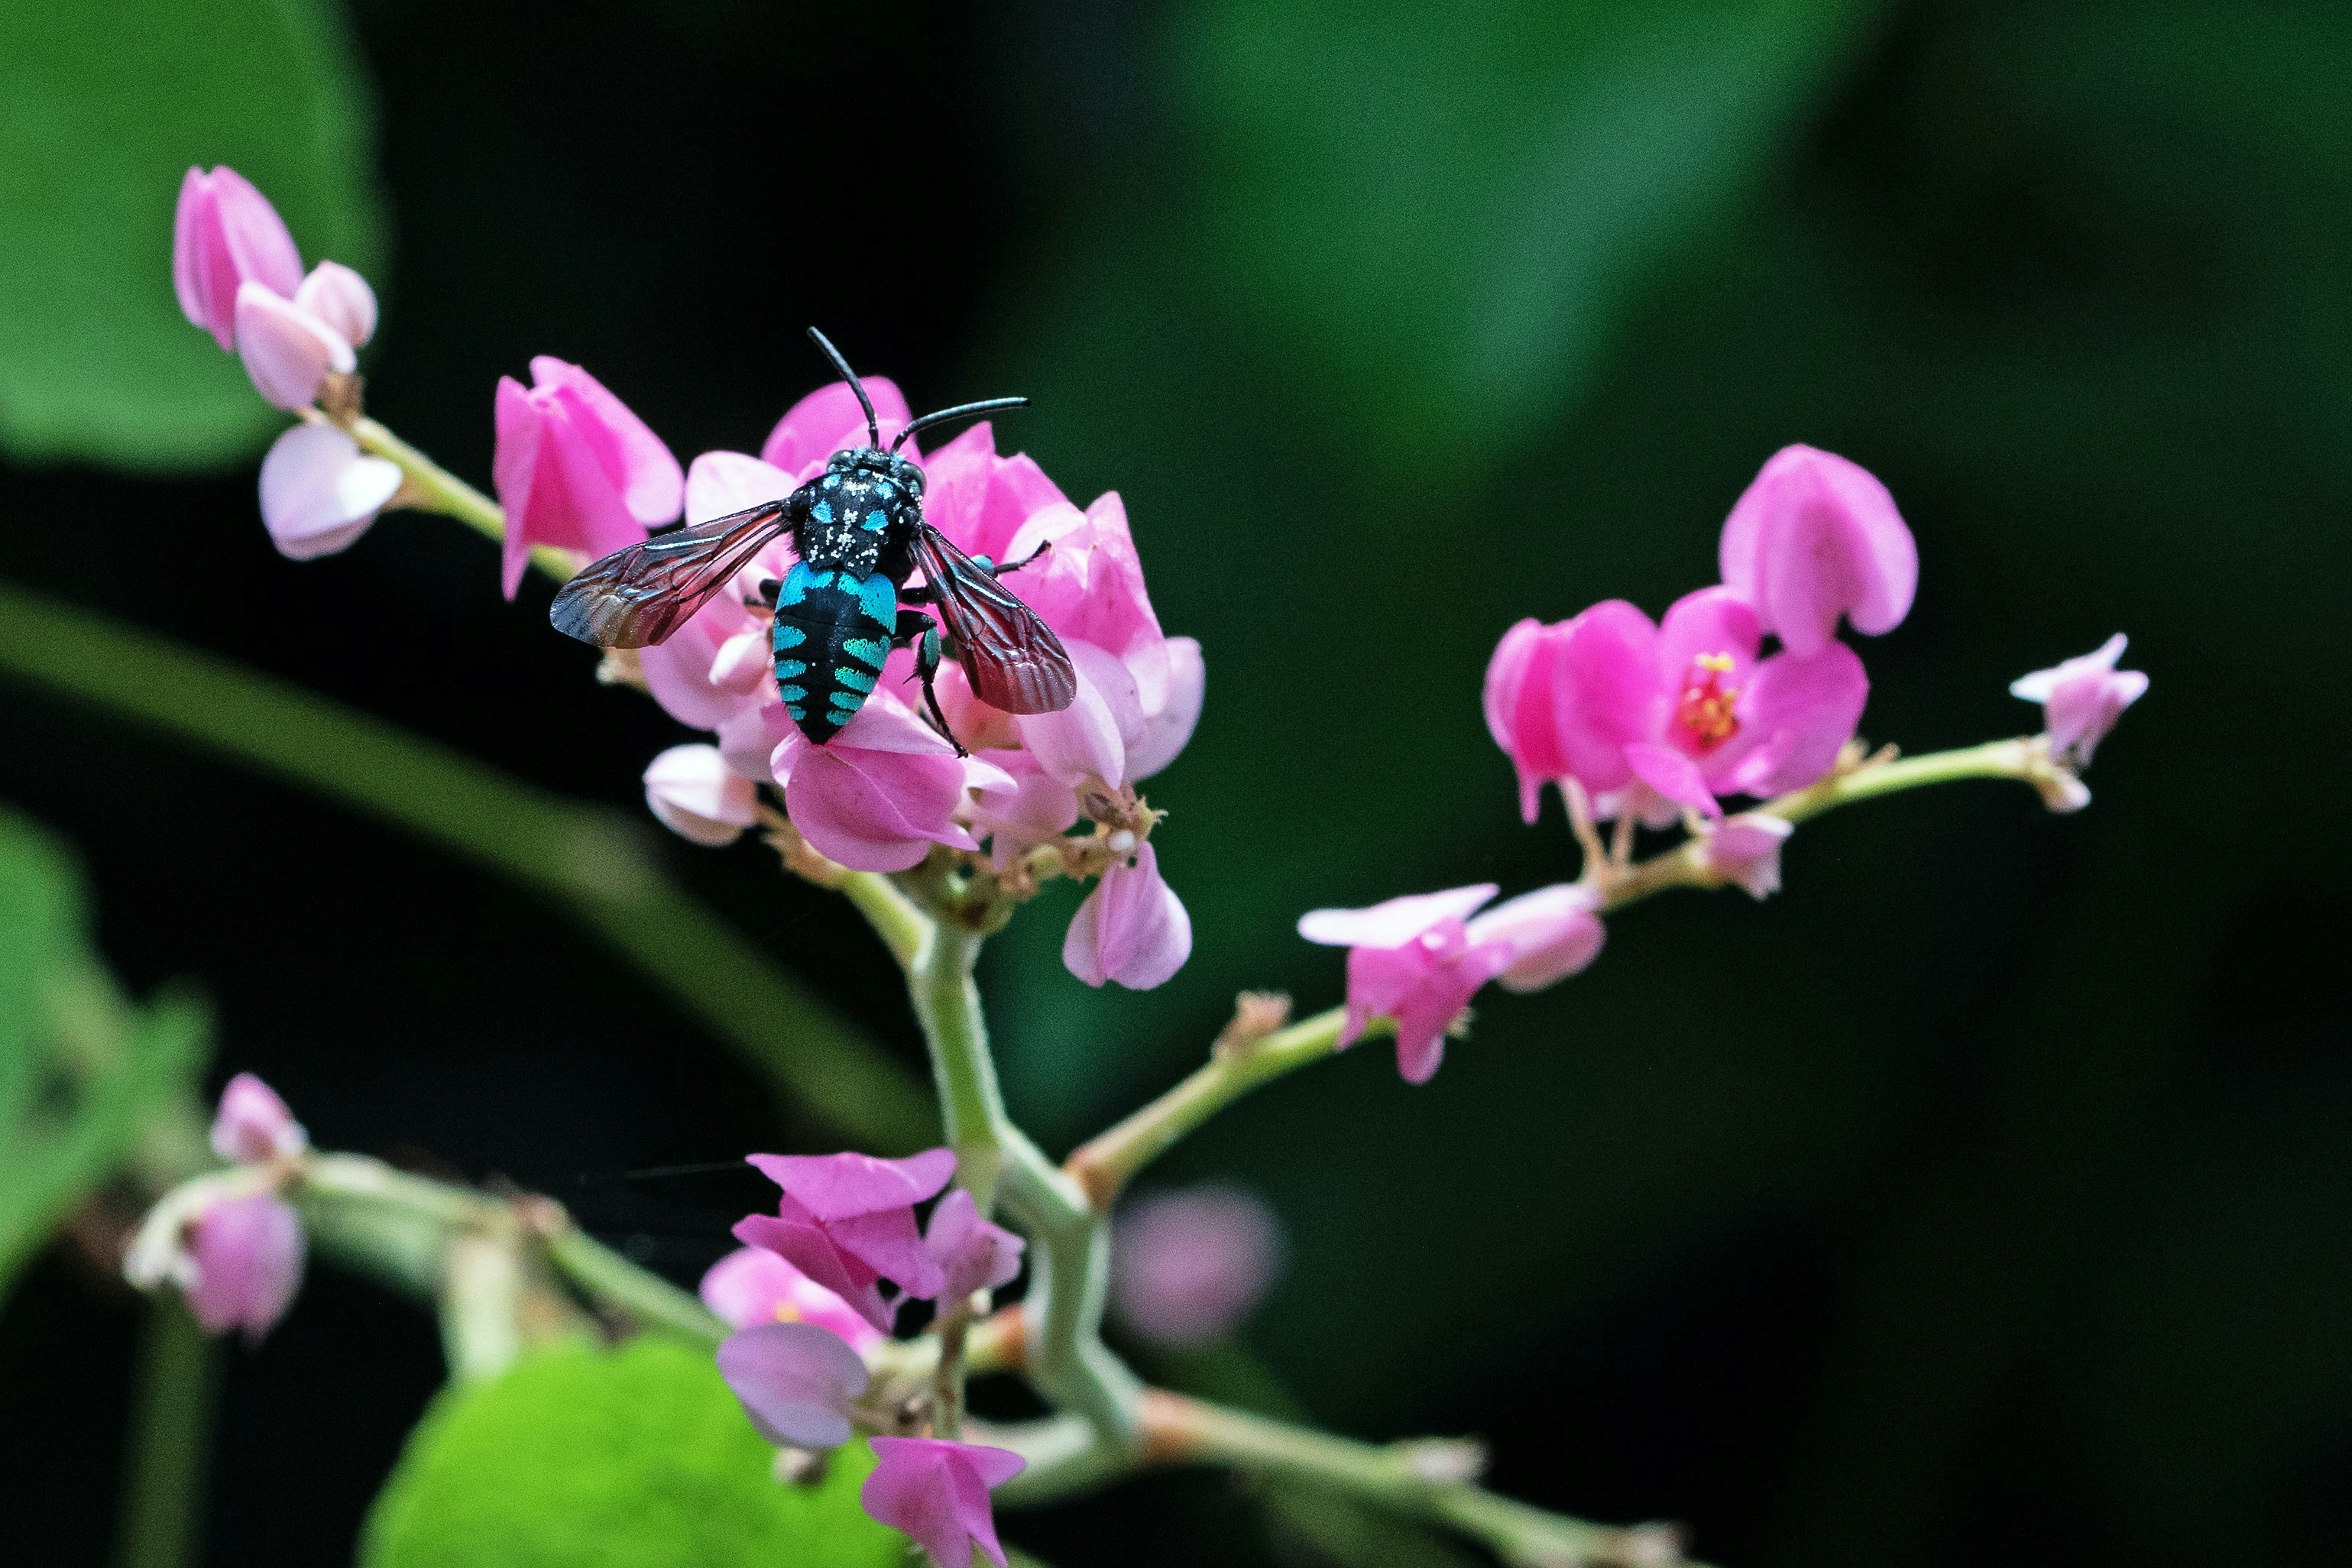 a bright blue and black bee resting on a pink flower